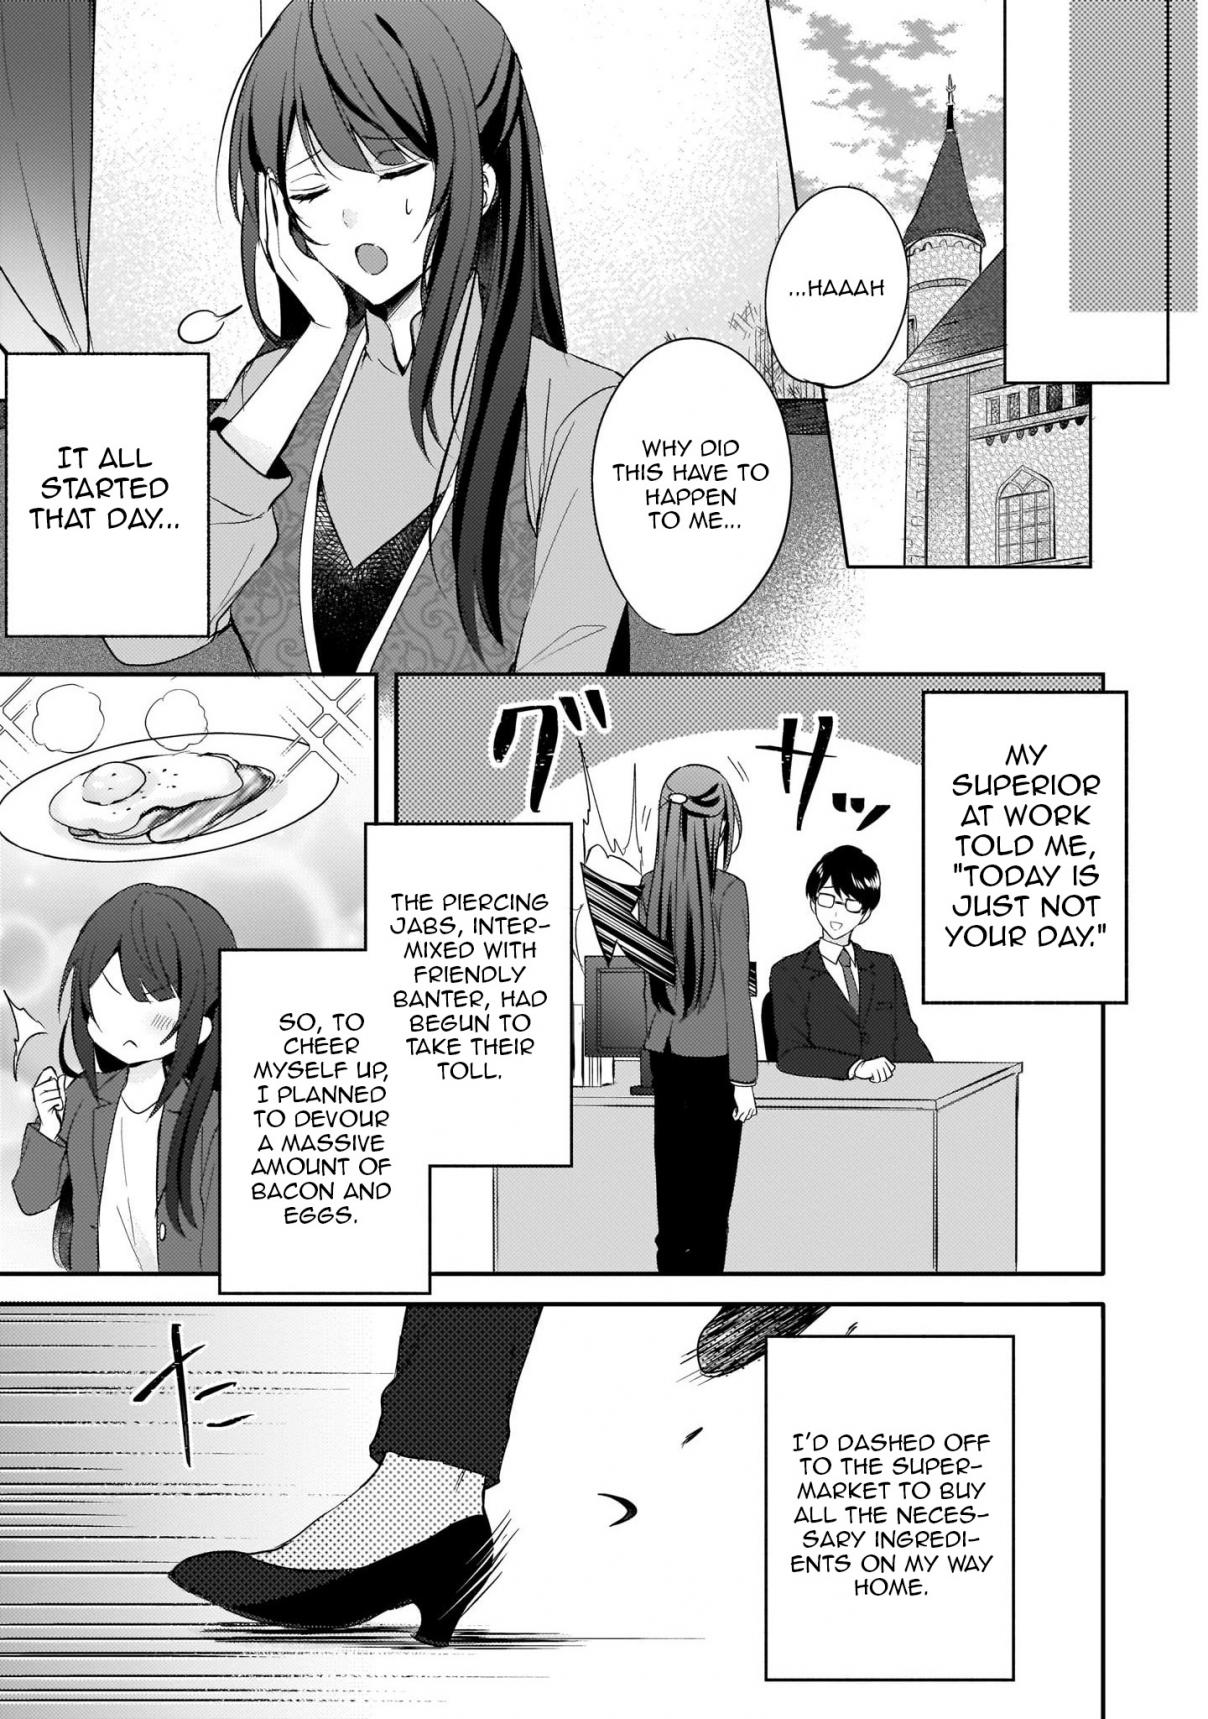 This "Summon Kitchen" Skill is Amazing! ~Amassing Points By Cooking in Another World~ Vol. 1 Ch. 1